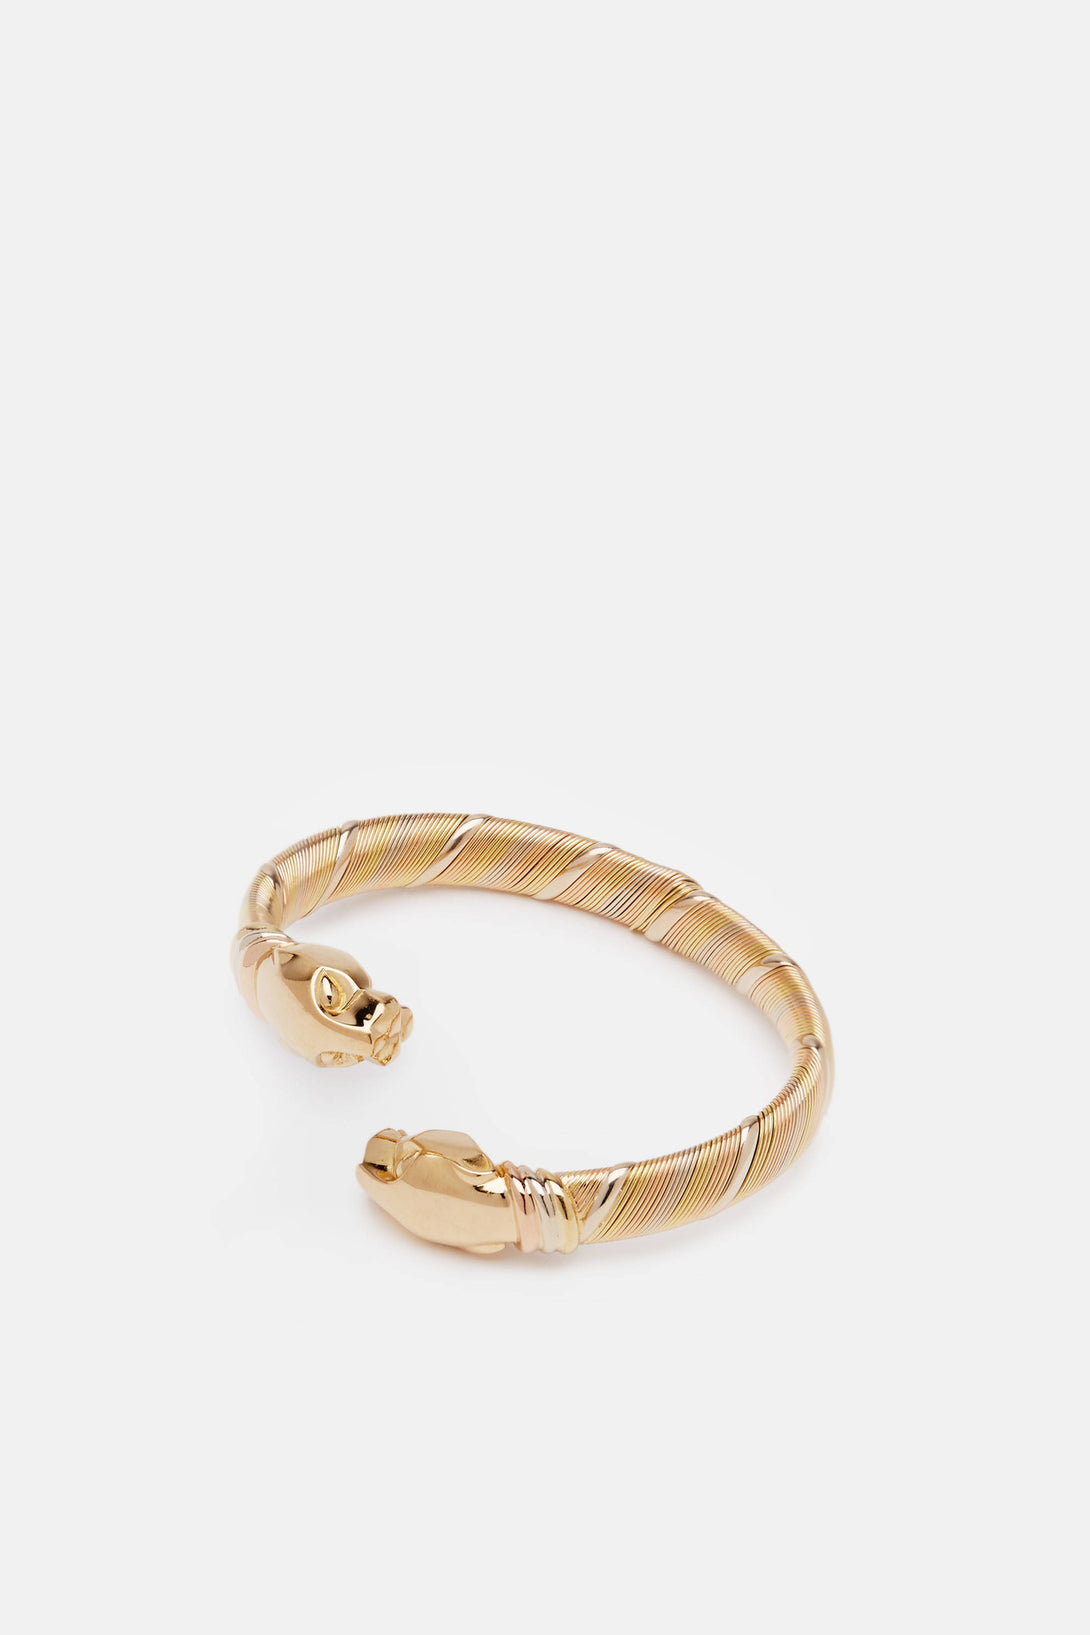 Cartier Panther Bangle – The Line